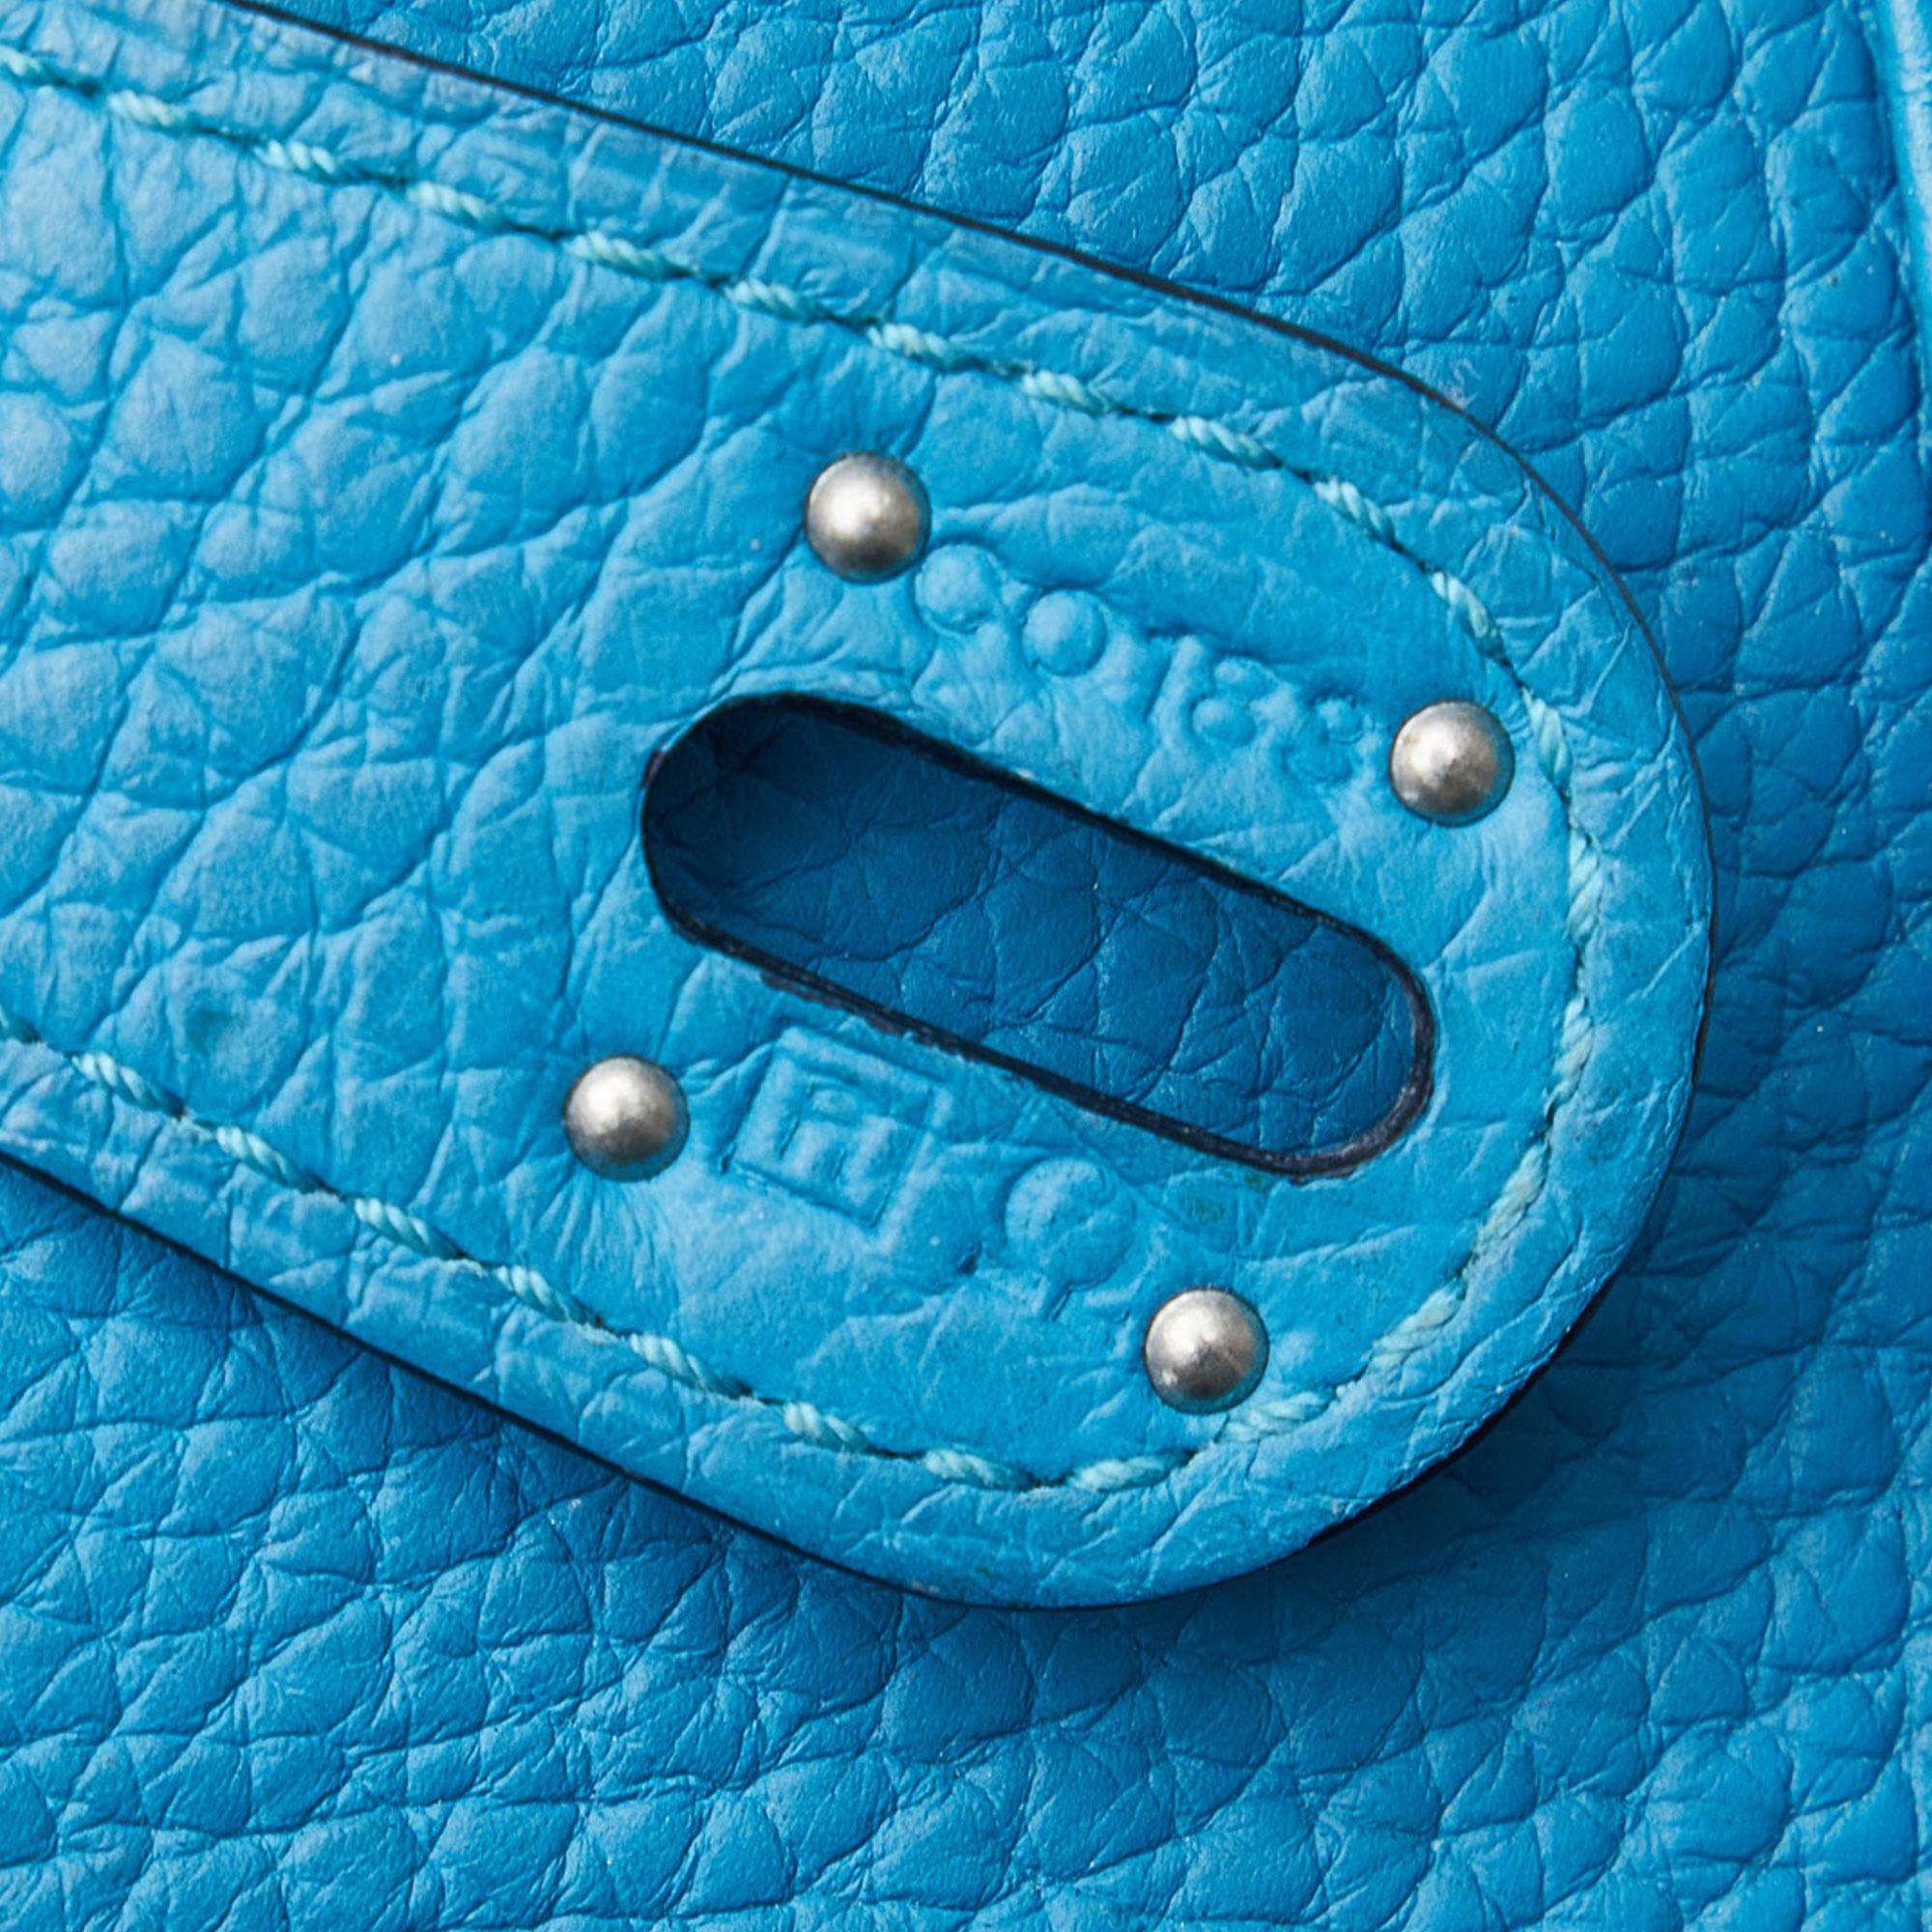 Hermes Blue Clemence Lindy 34